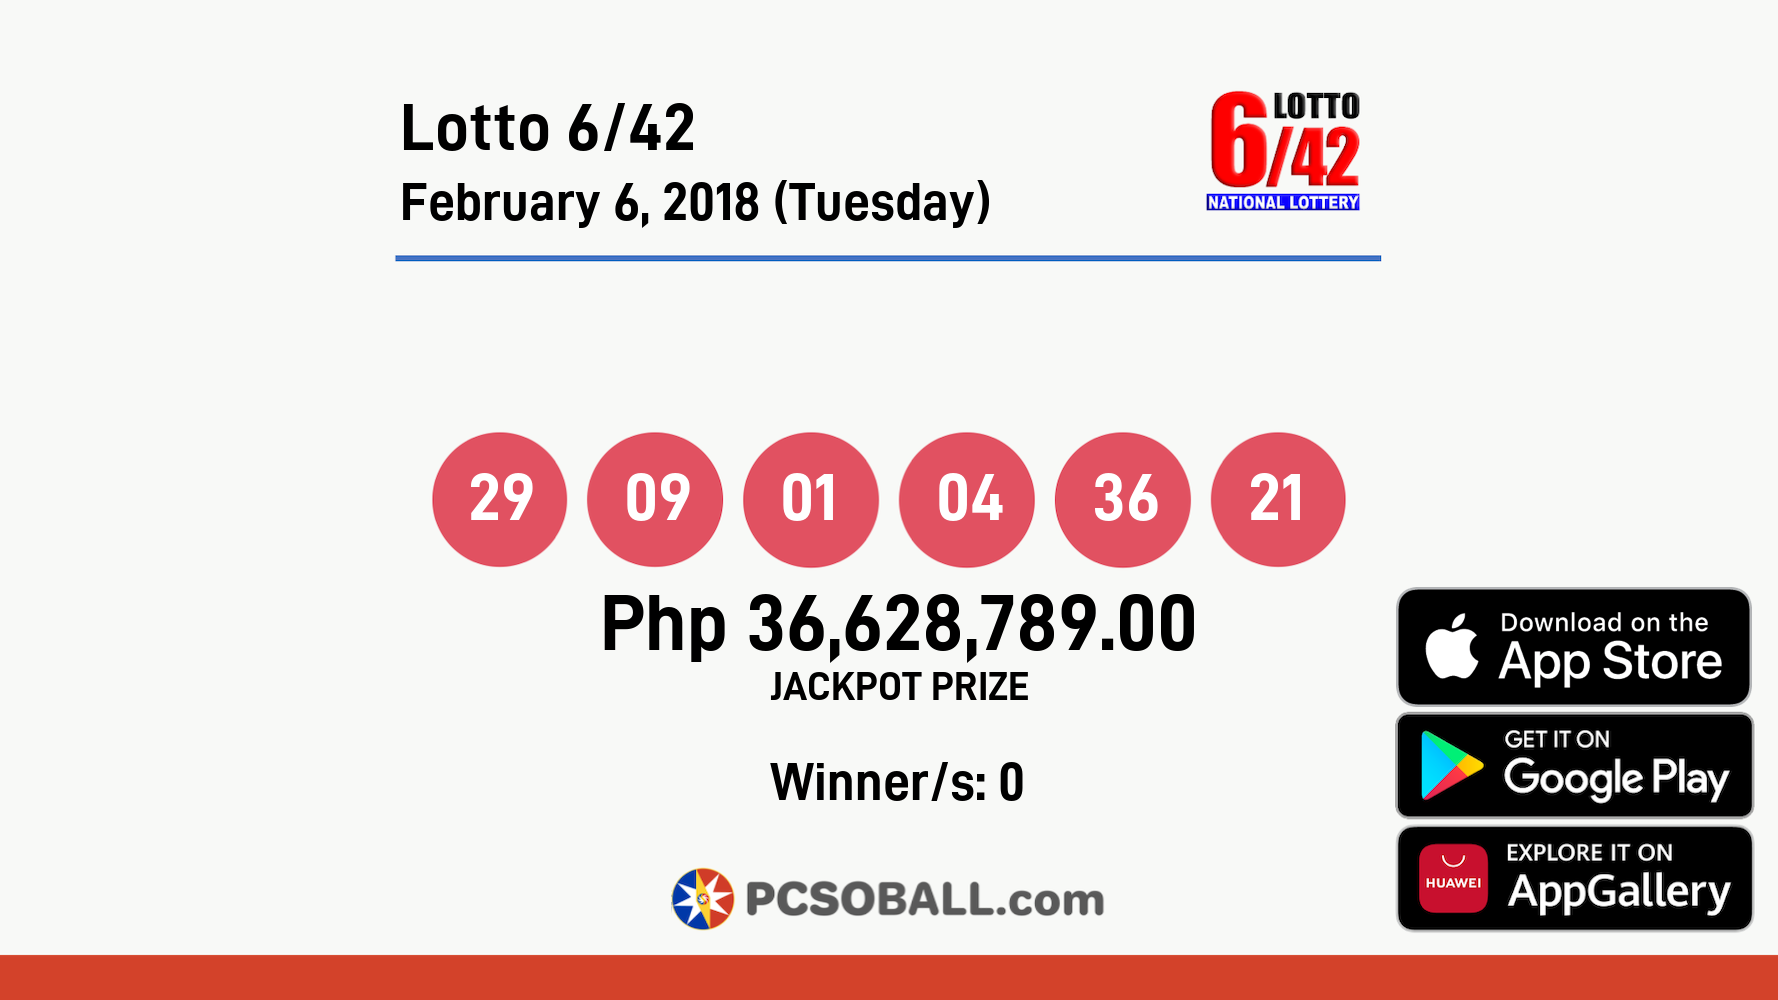 Lotto 6/42 February 6, 2018 (Tuesday) Result